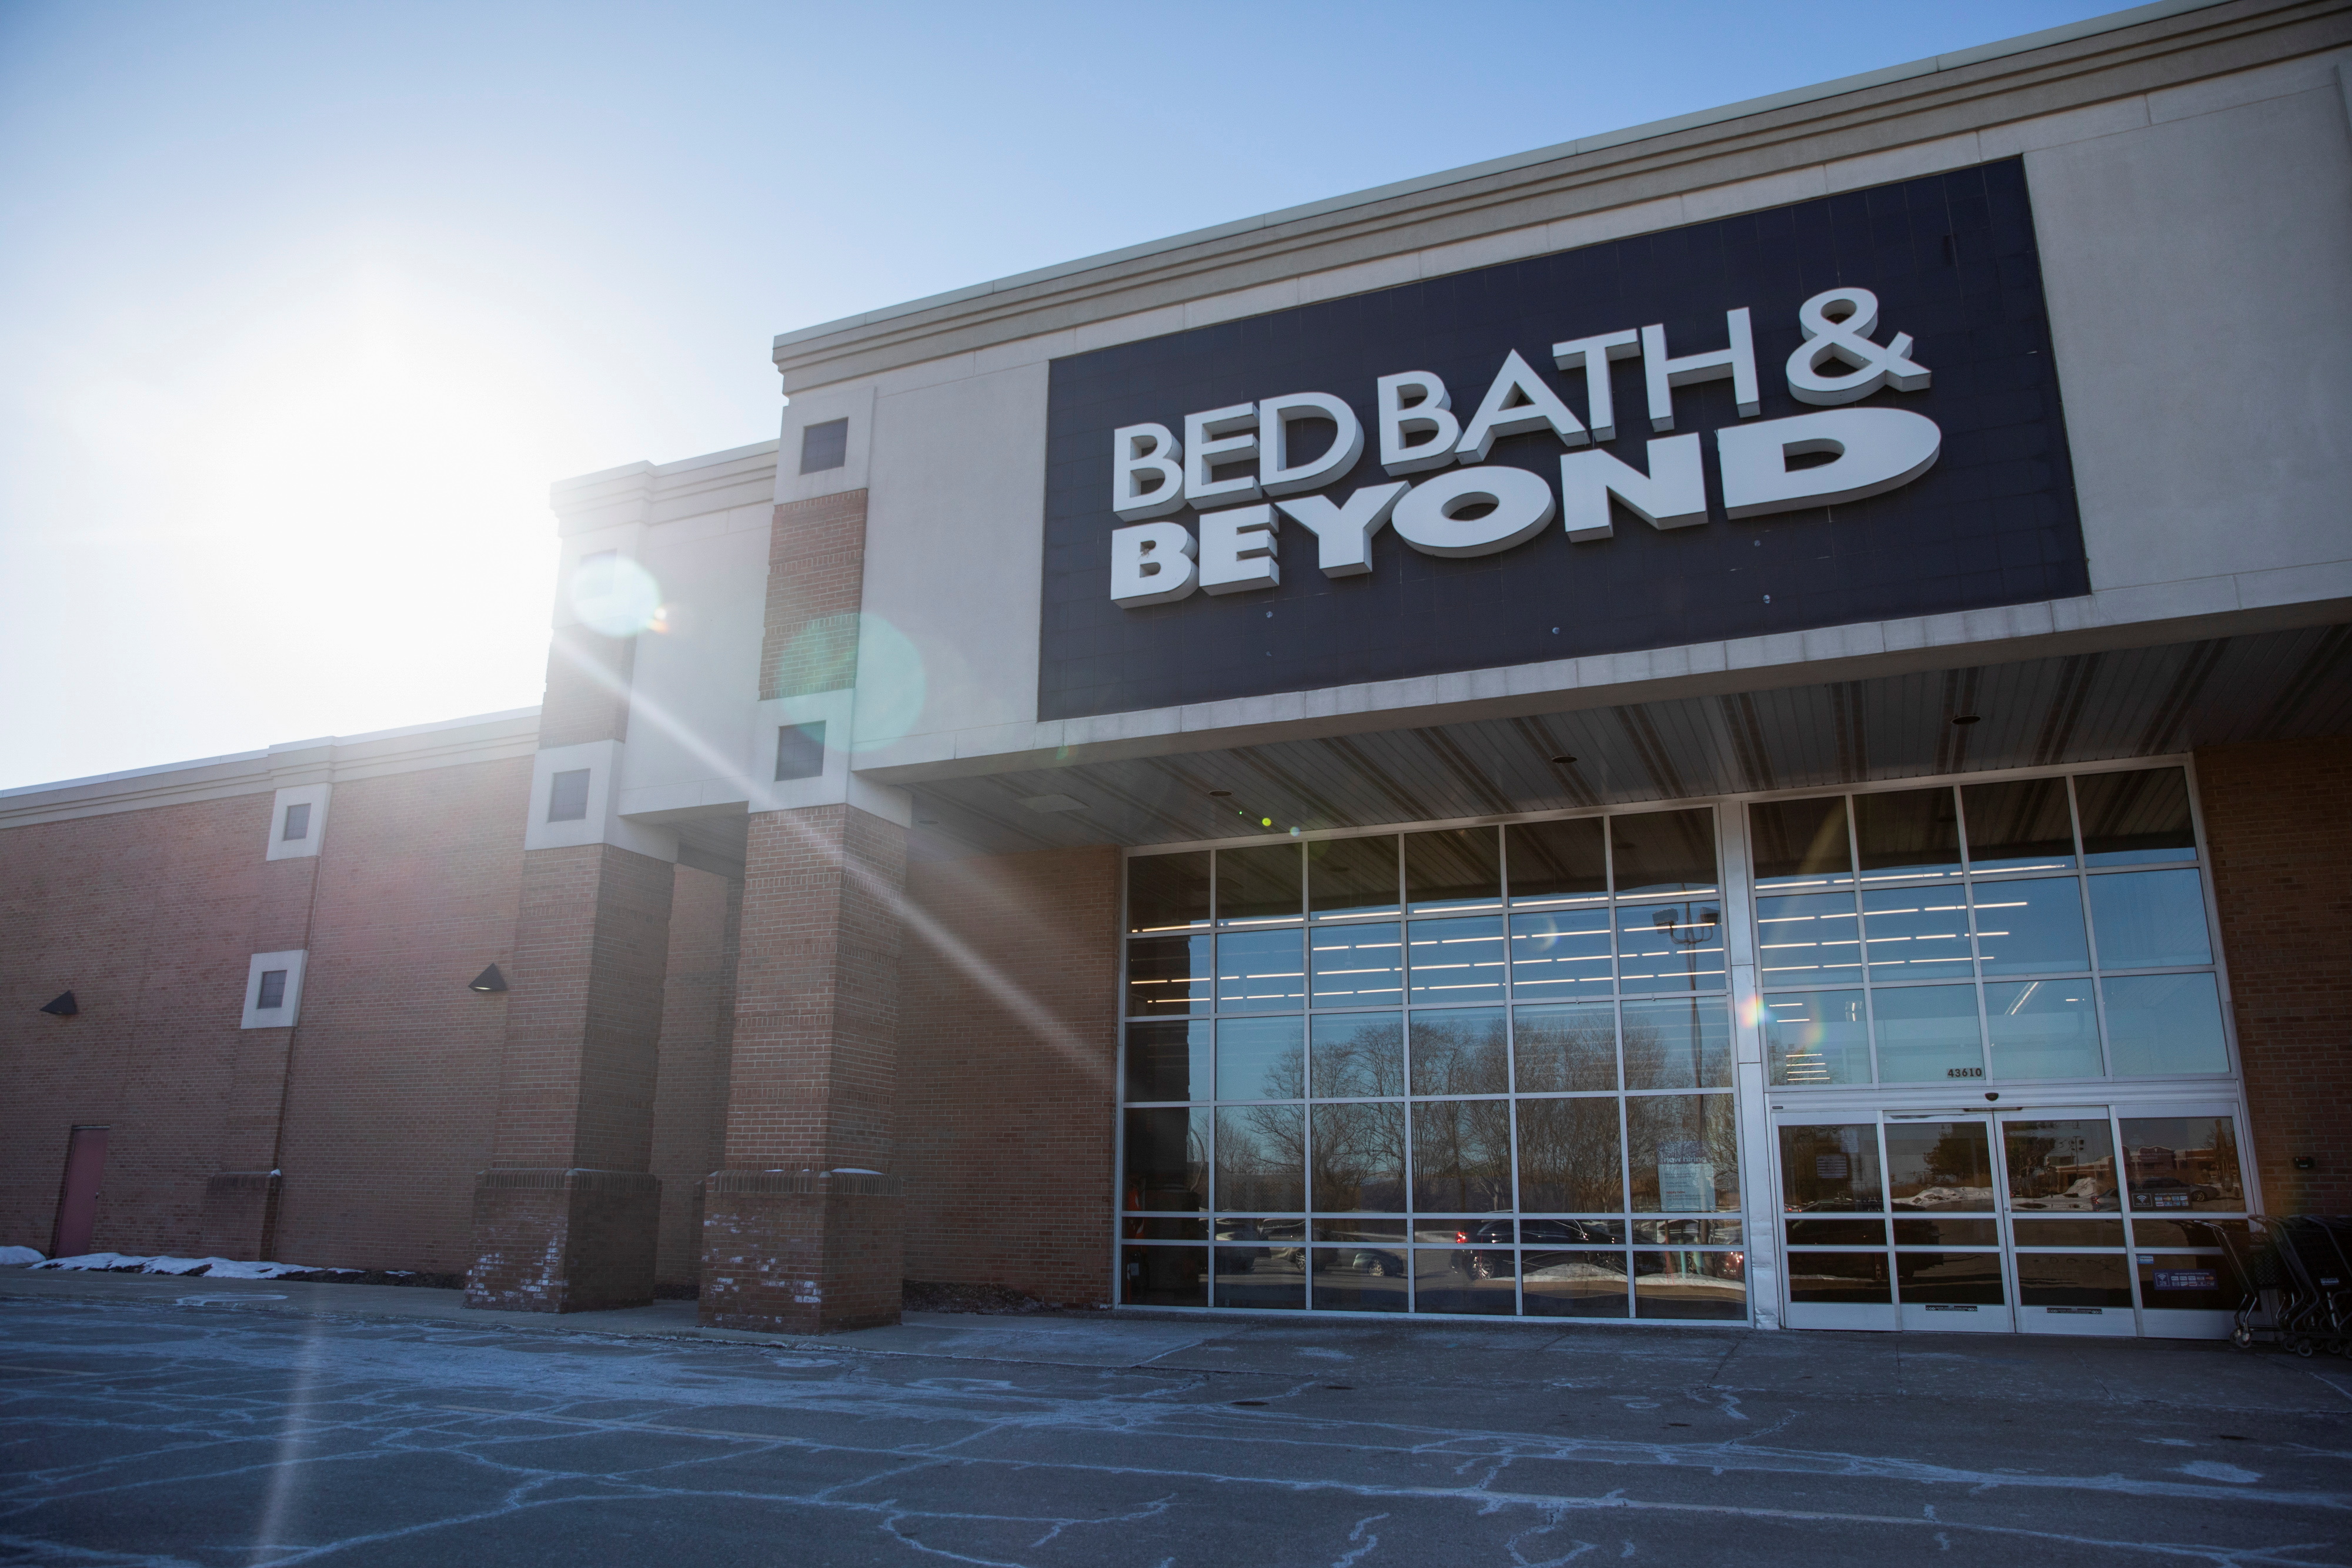 An exterior view shows a Bed Bath & Beyond store in Novi, Michigan